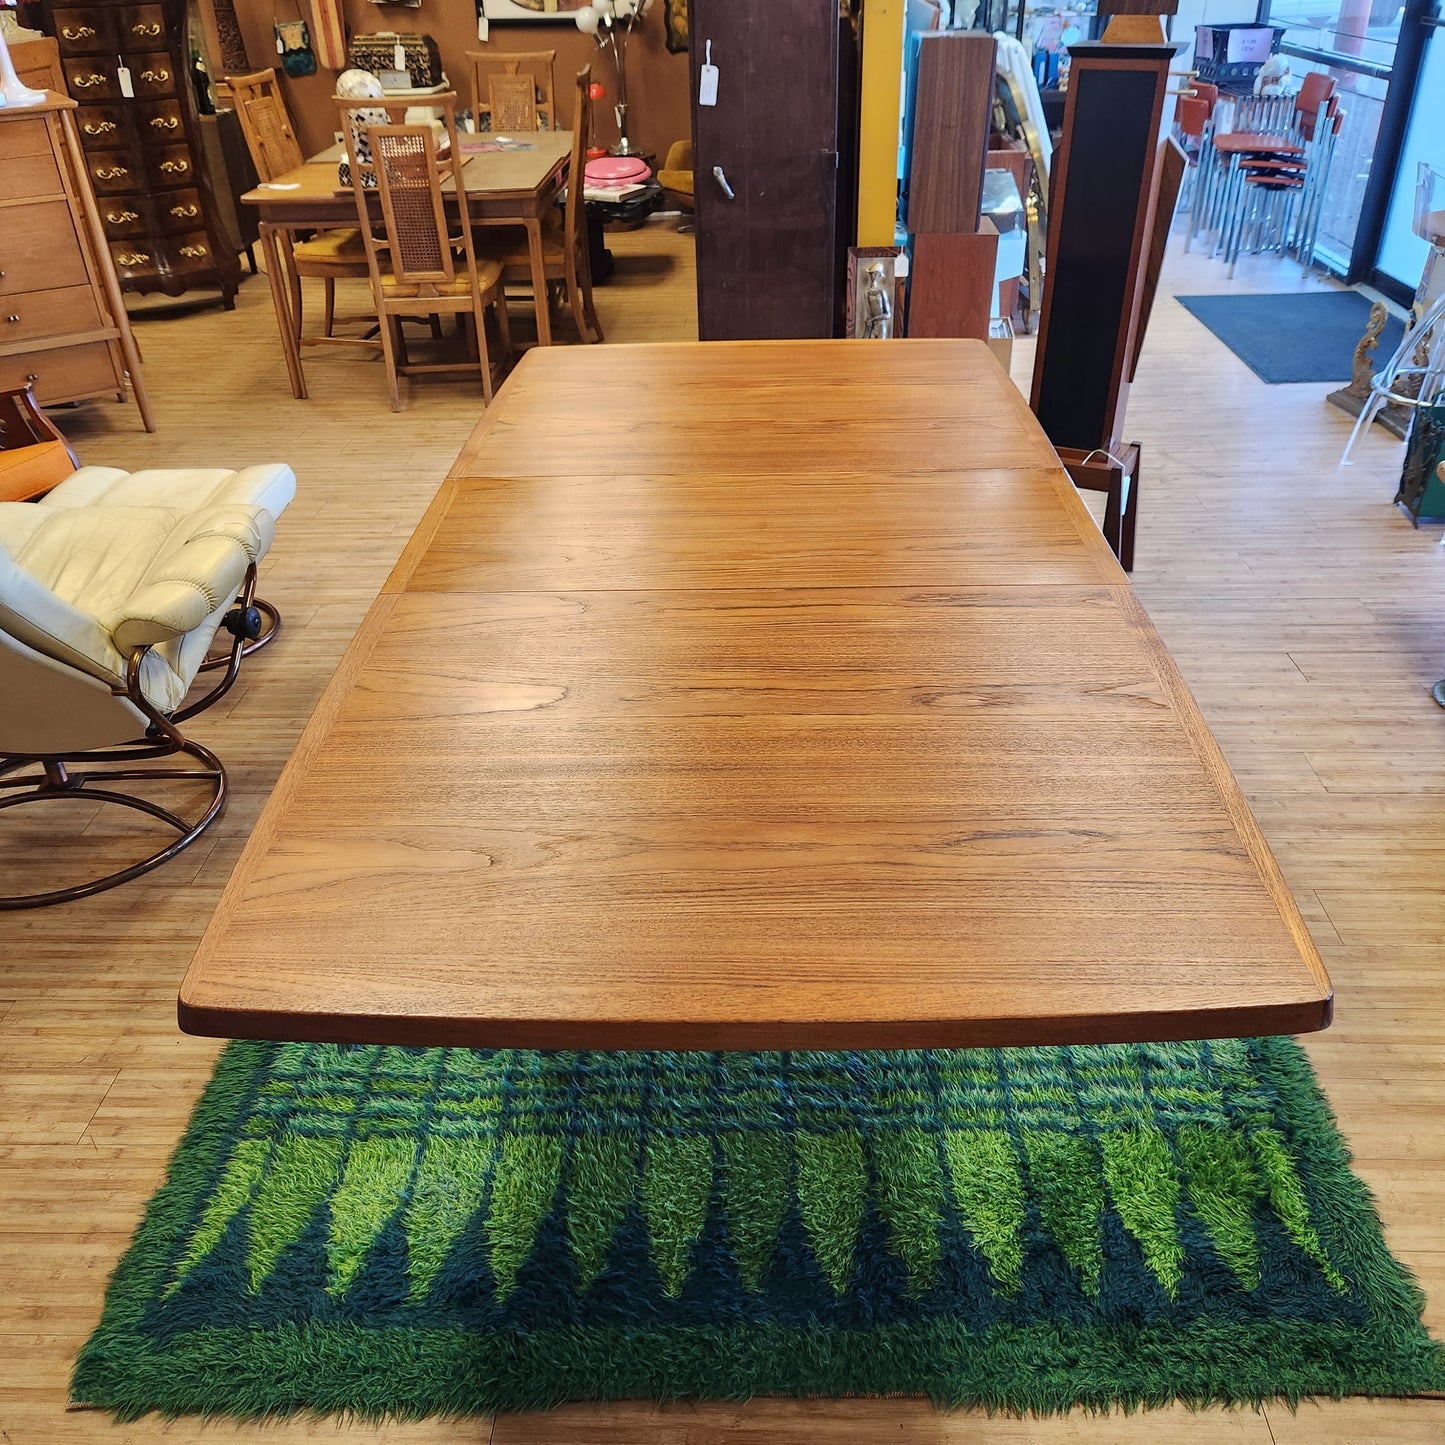 Mid-Century Modern Teak Dining Table With 2 Leaves